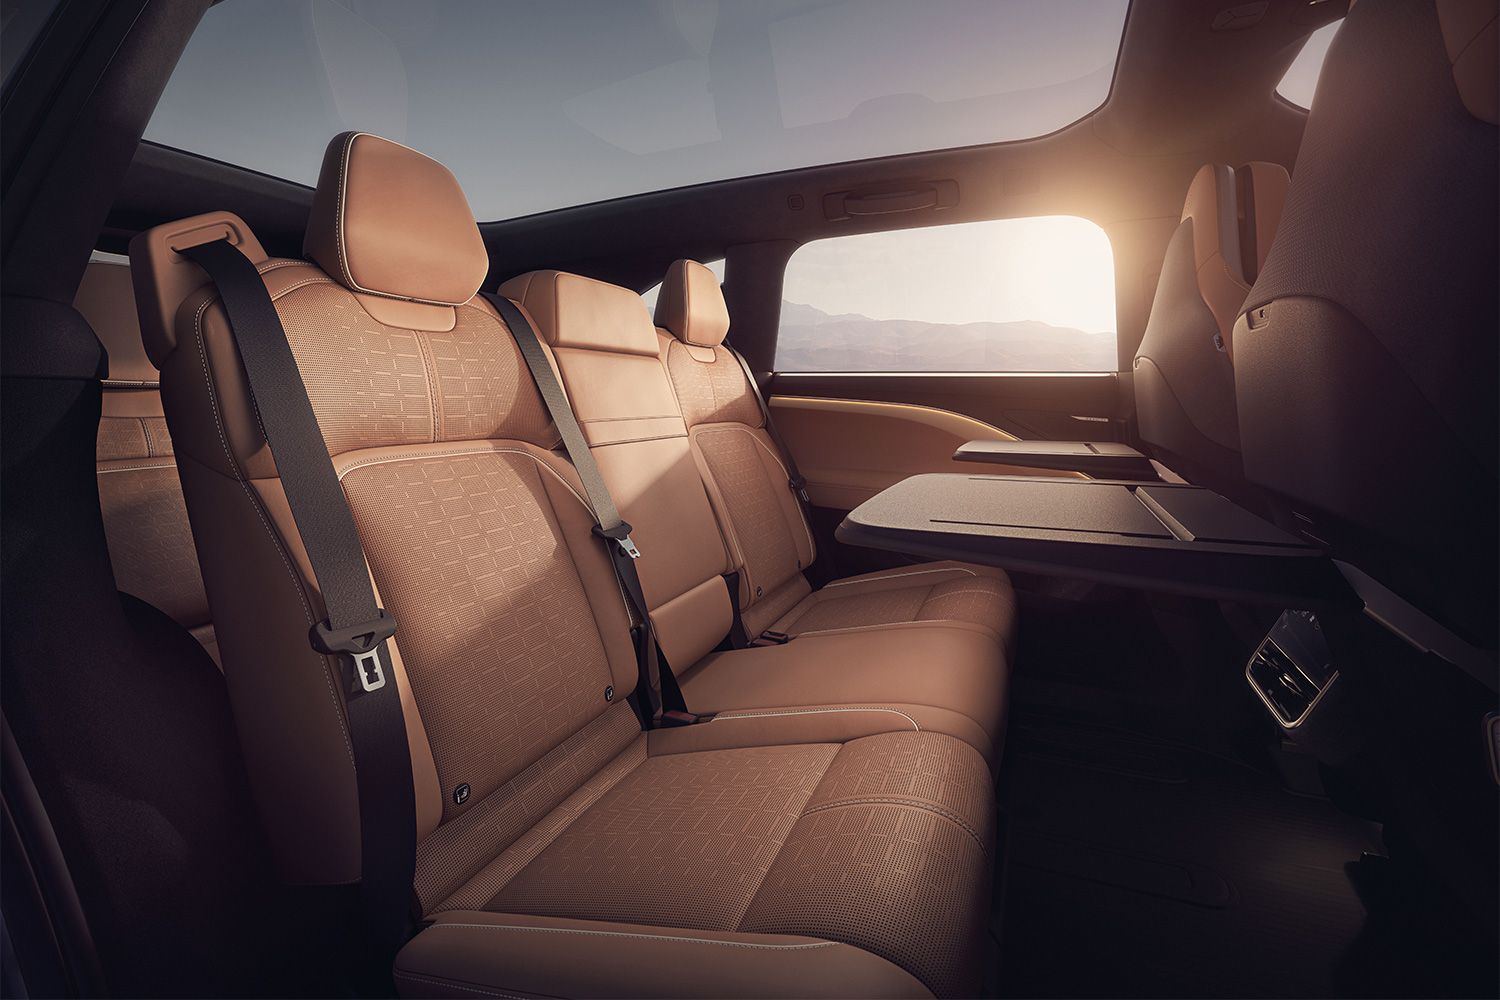 The second row of seats in Lucid's new electric SUV